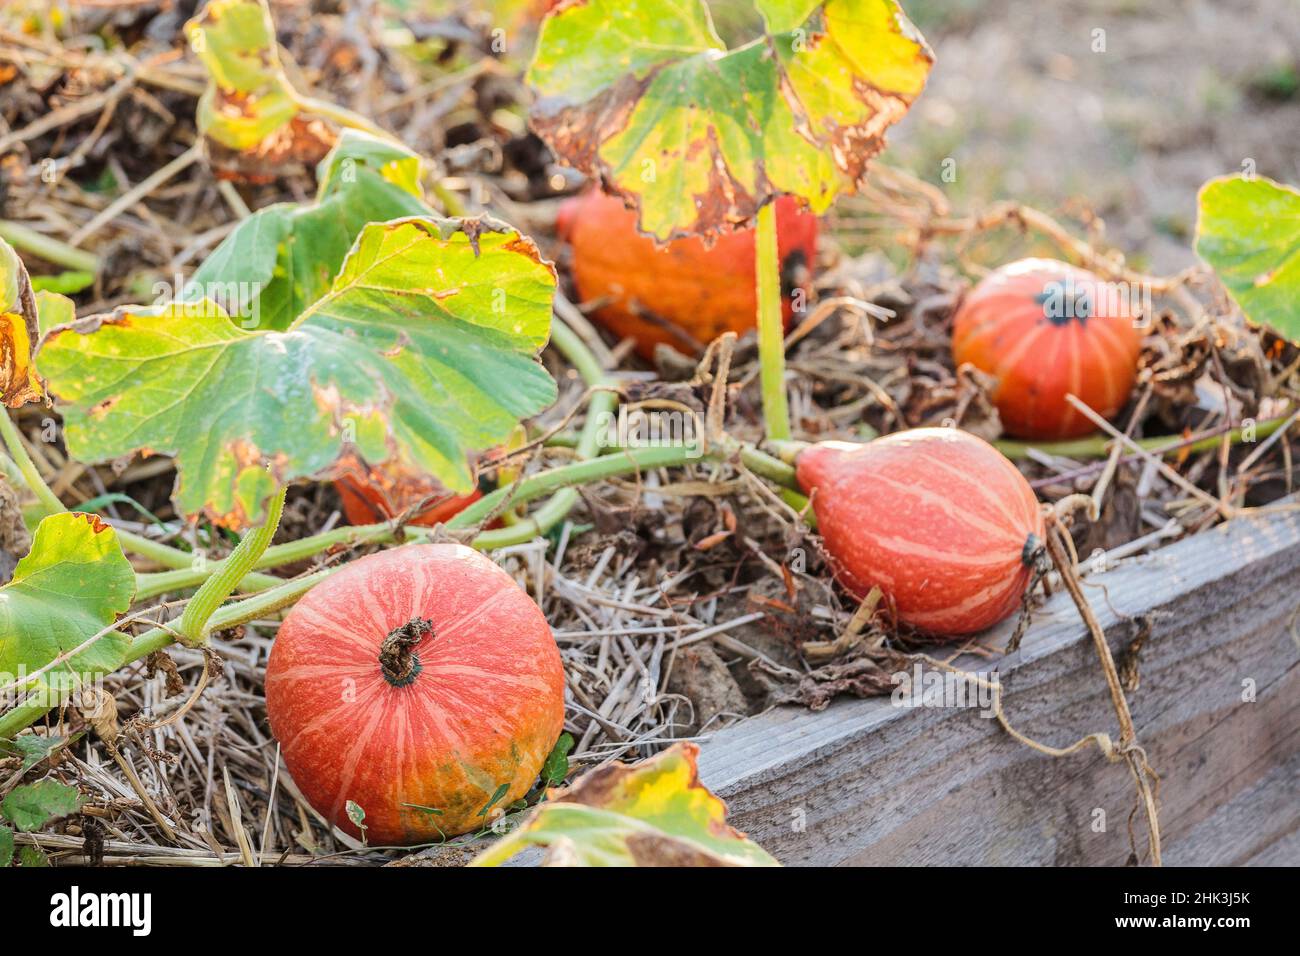 Pumpkins 'Red Kuri' ready to be harvested in September. Stock Photo